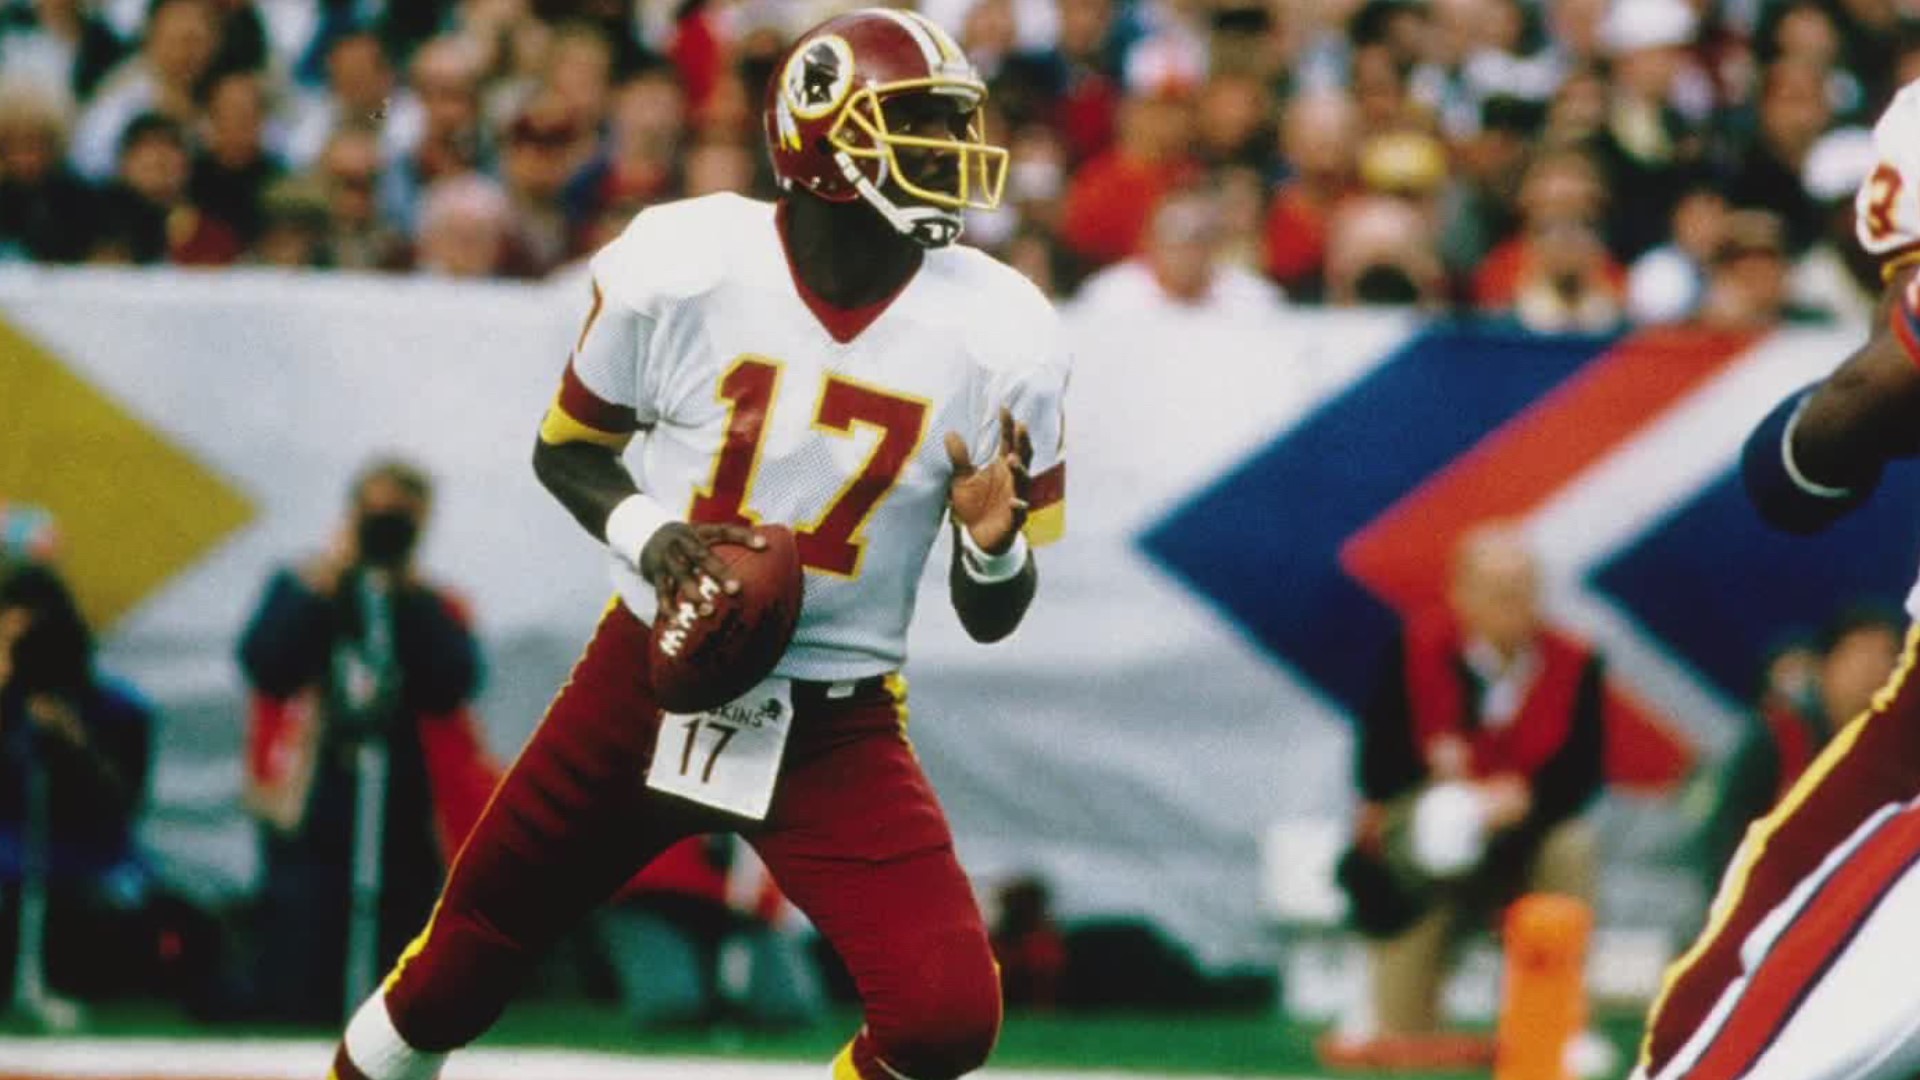 Williams was the first African-American quarterback to win a Super Bowl. He scored four of Washington's five touchdowns in their 1988 42-10 win over the Broncos.